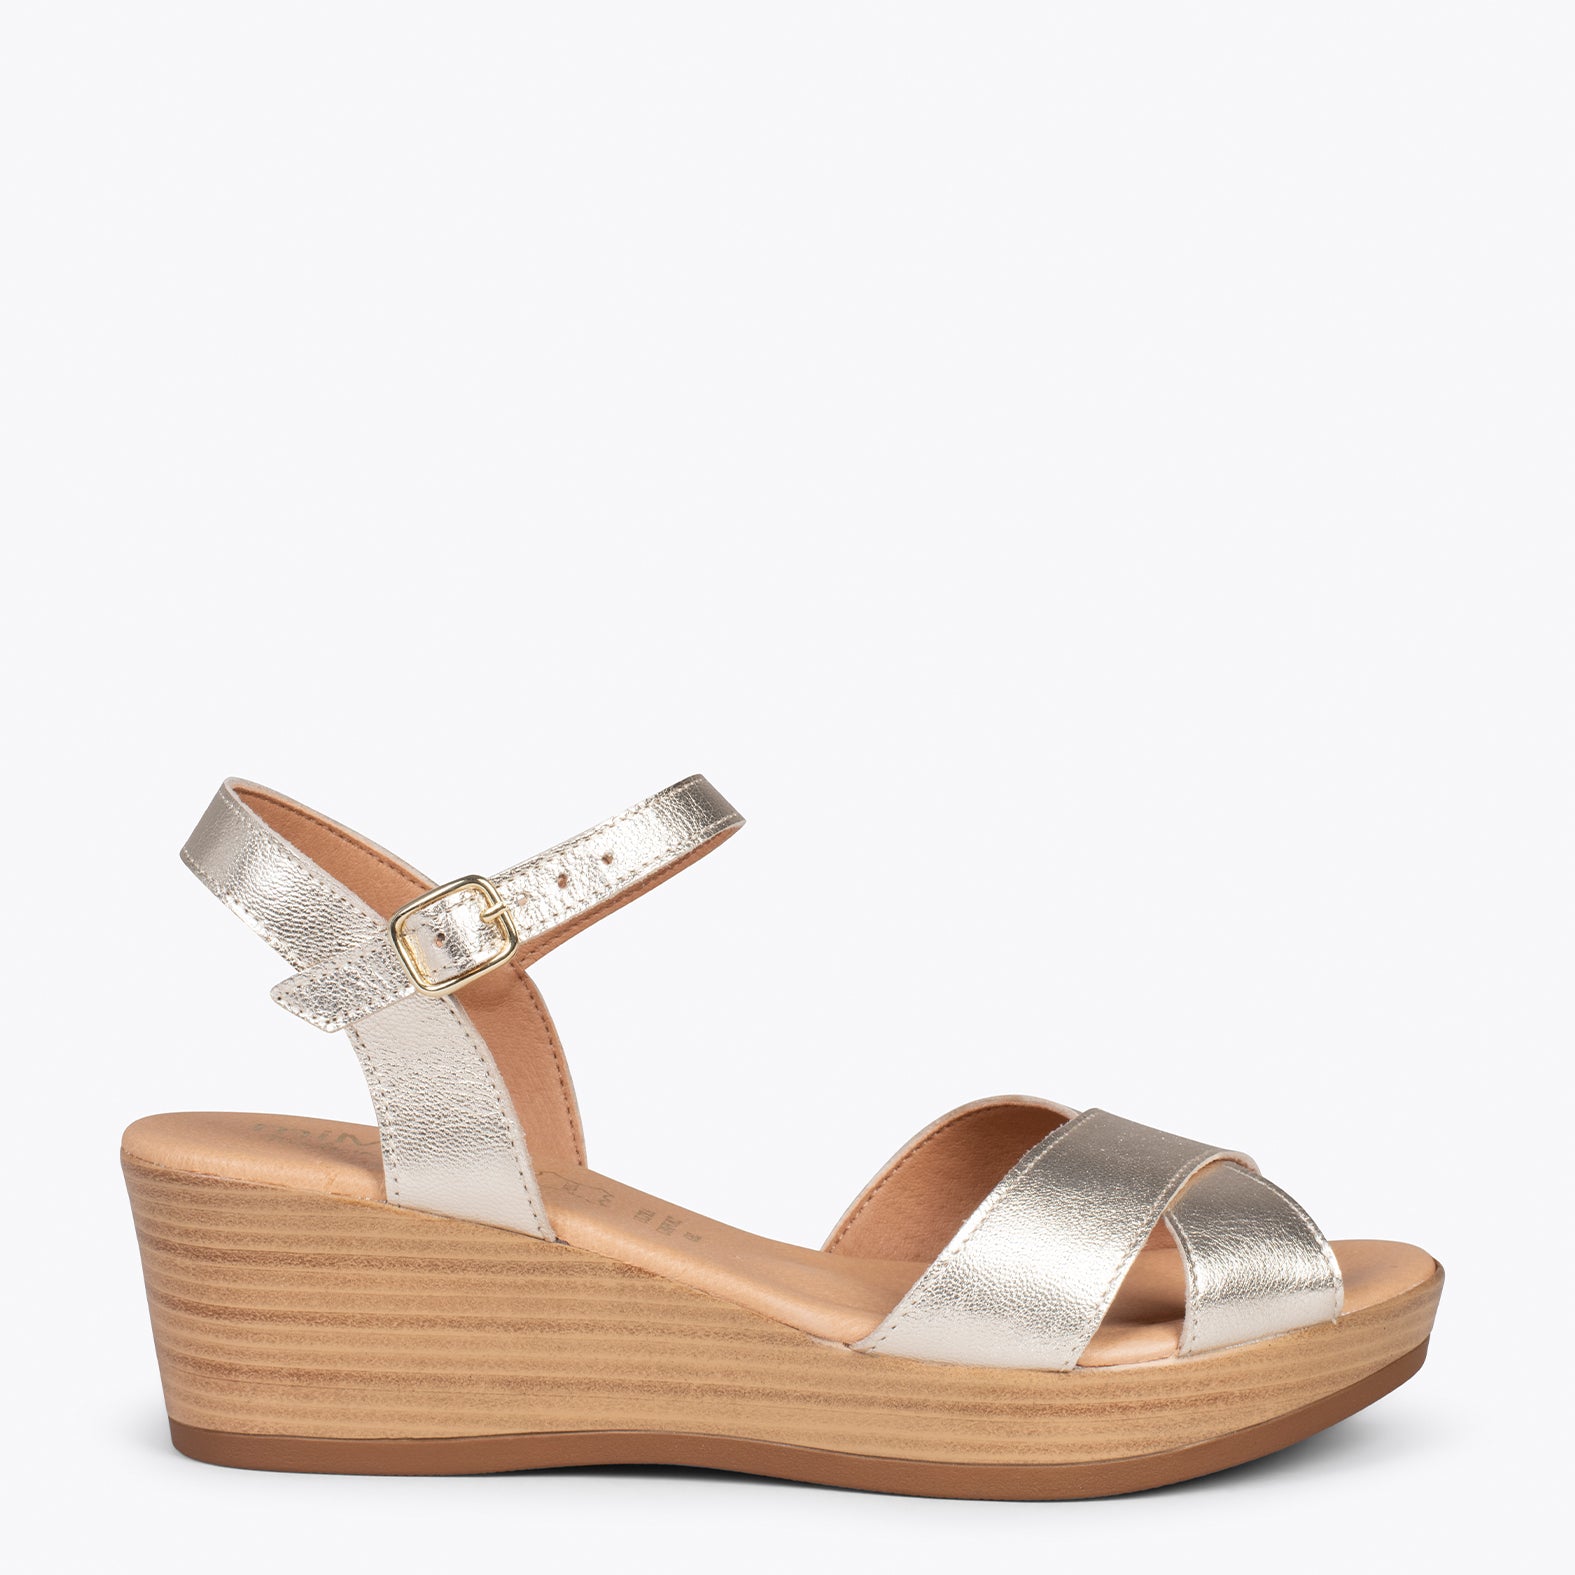 SEA- GOLDEN comfortable sandal with wedge